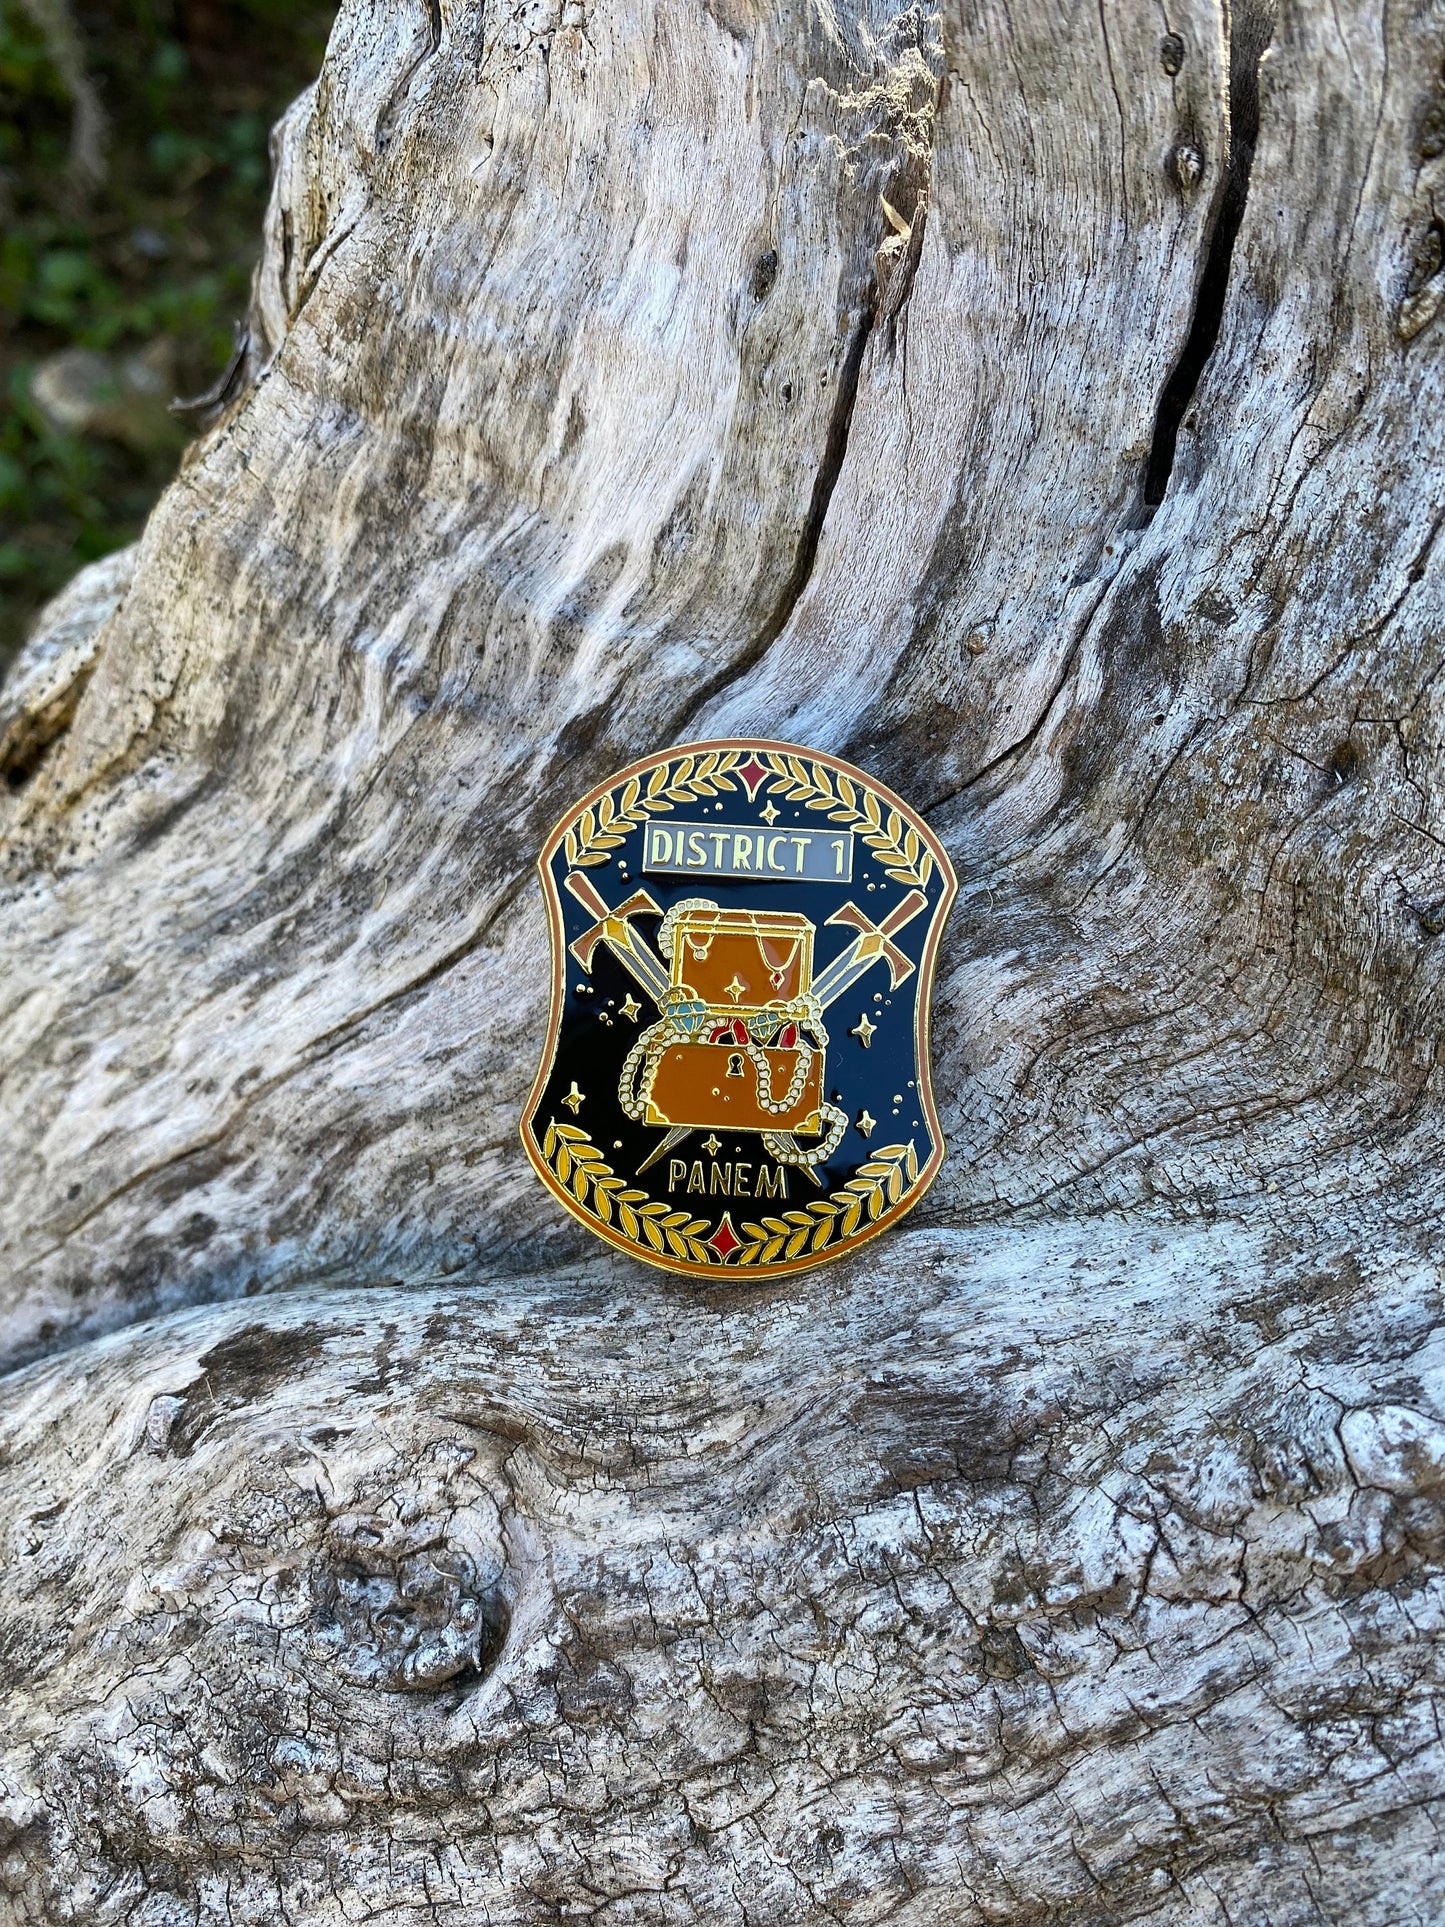 The Hunger Games District 1 Enamel Pin